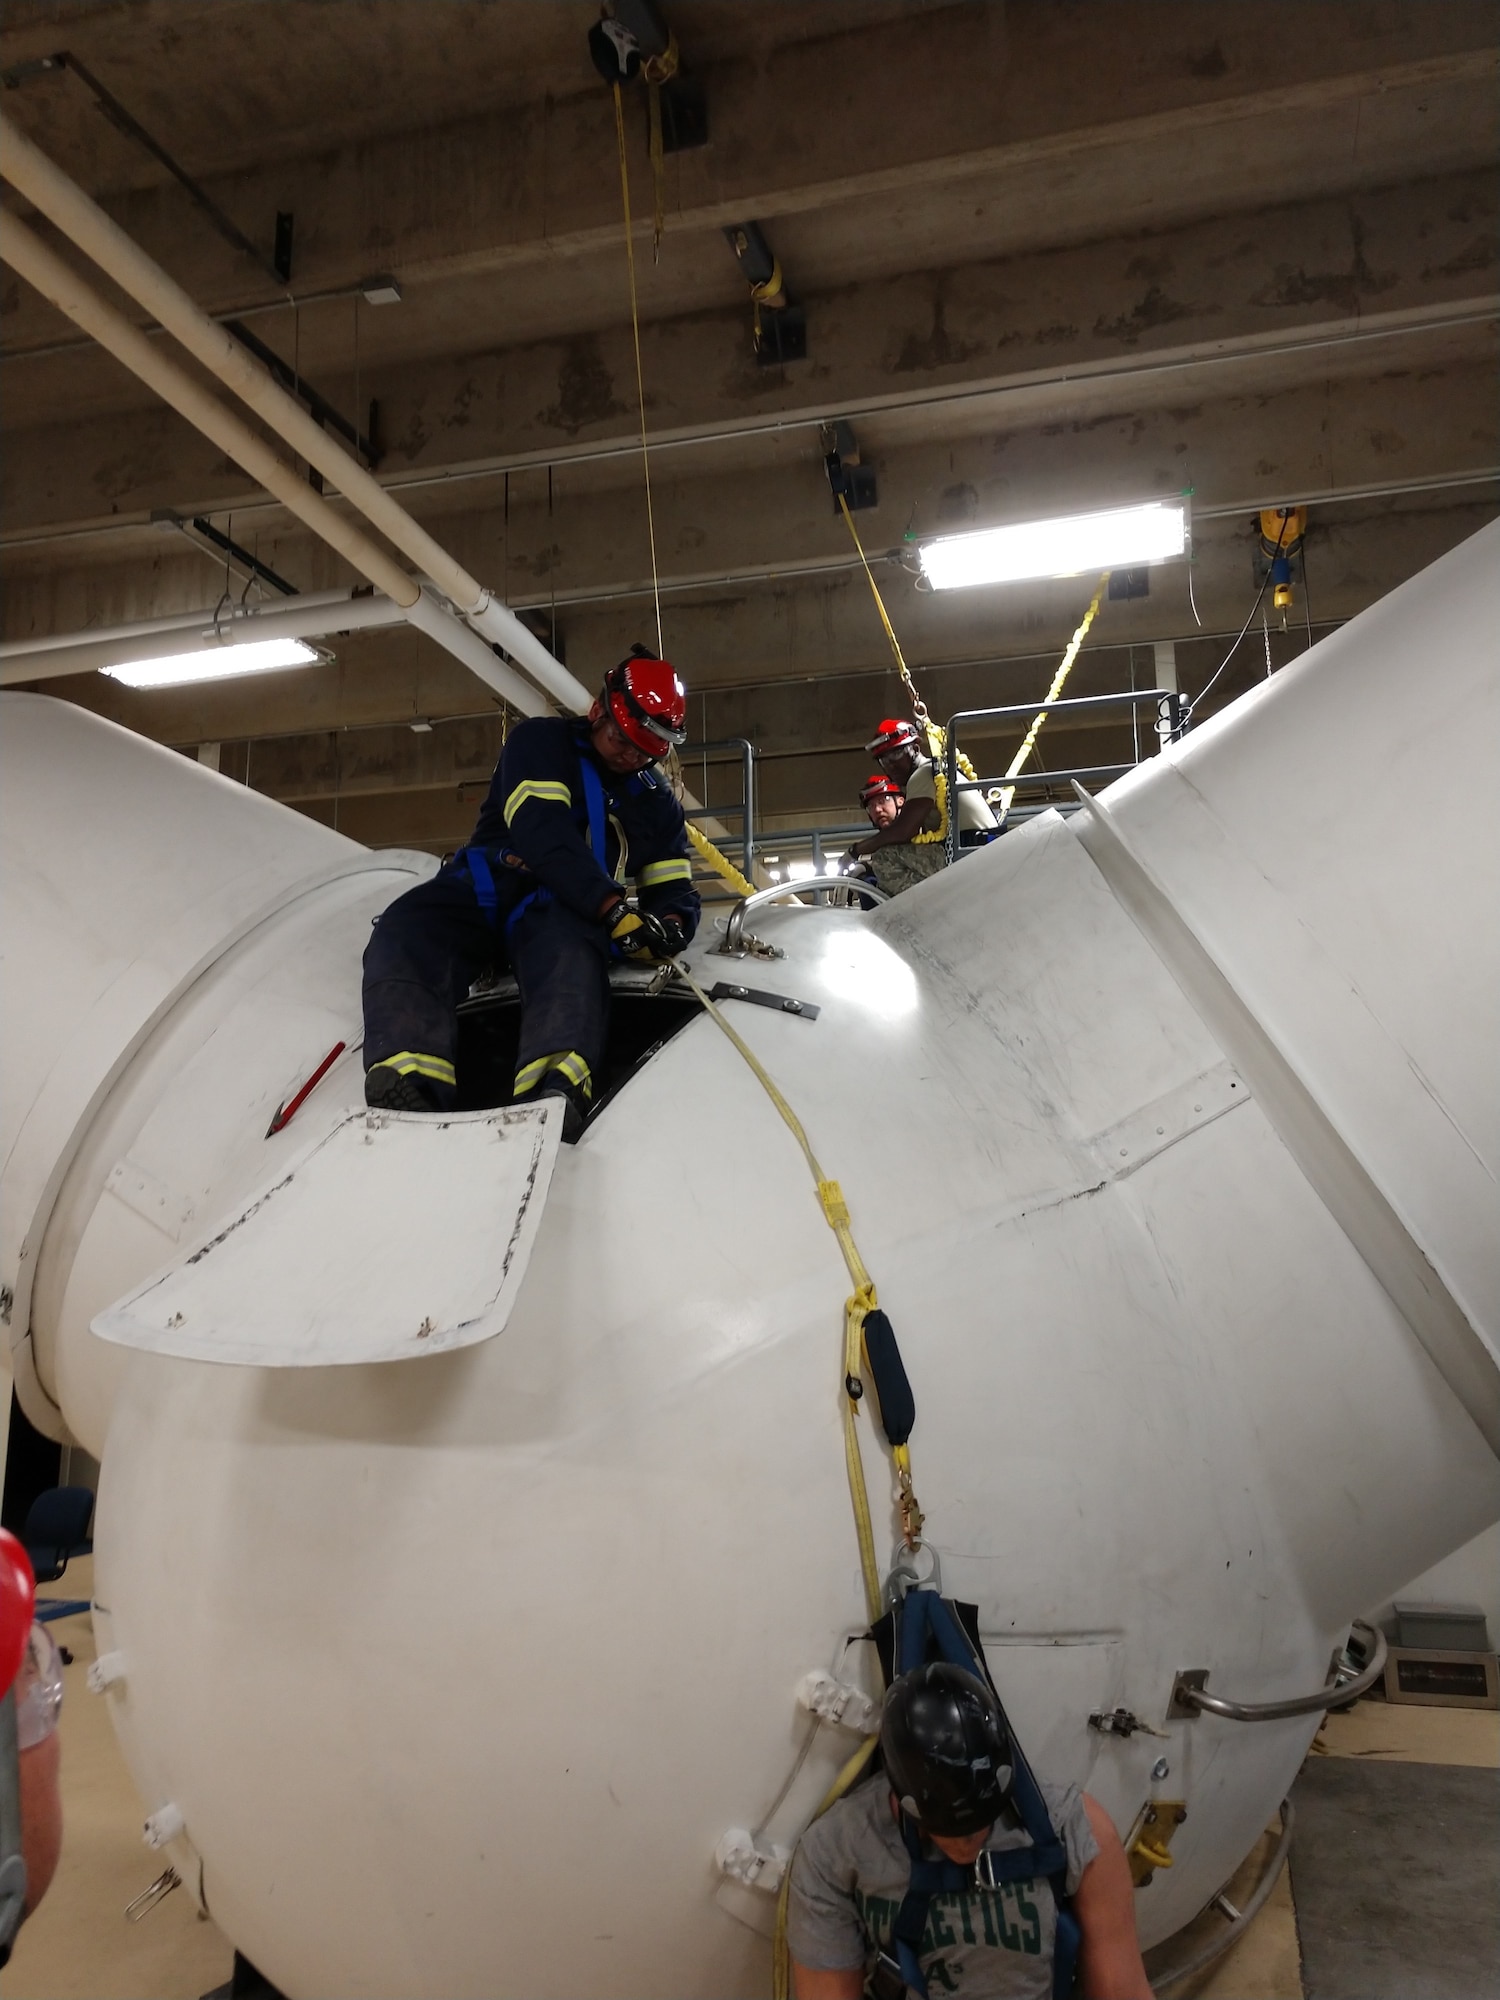 Cody Woolett, 90th Civil Engineer Squadron lead firefighter, preforms an over the hub rescue on a wind turbine at the Laramie County Community College Climb Safety Lab, Cheyenne, Wyo., June 5, 2018. The firefighters participating in the course learned and practiced different methods of recovery for each stage of the wind turbine. (Courtesy Photo)